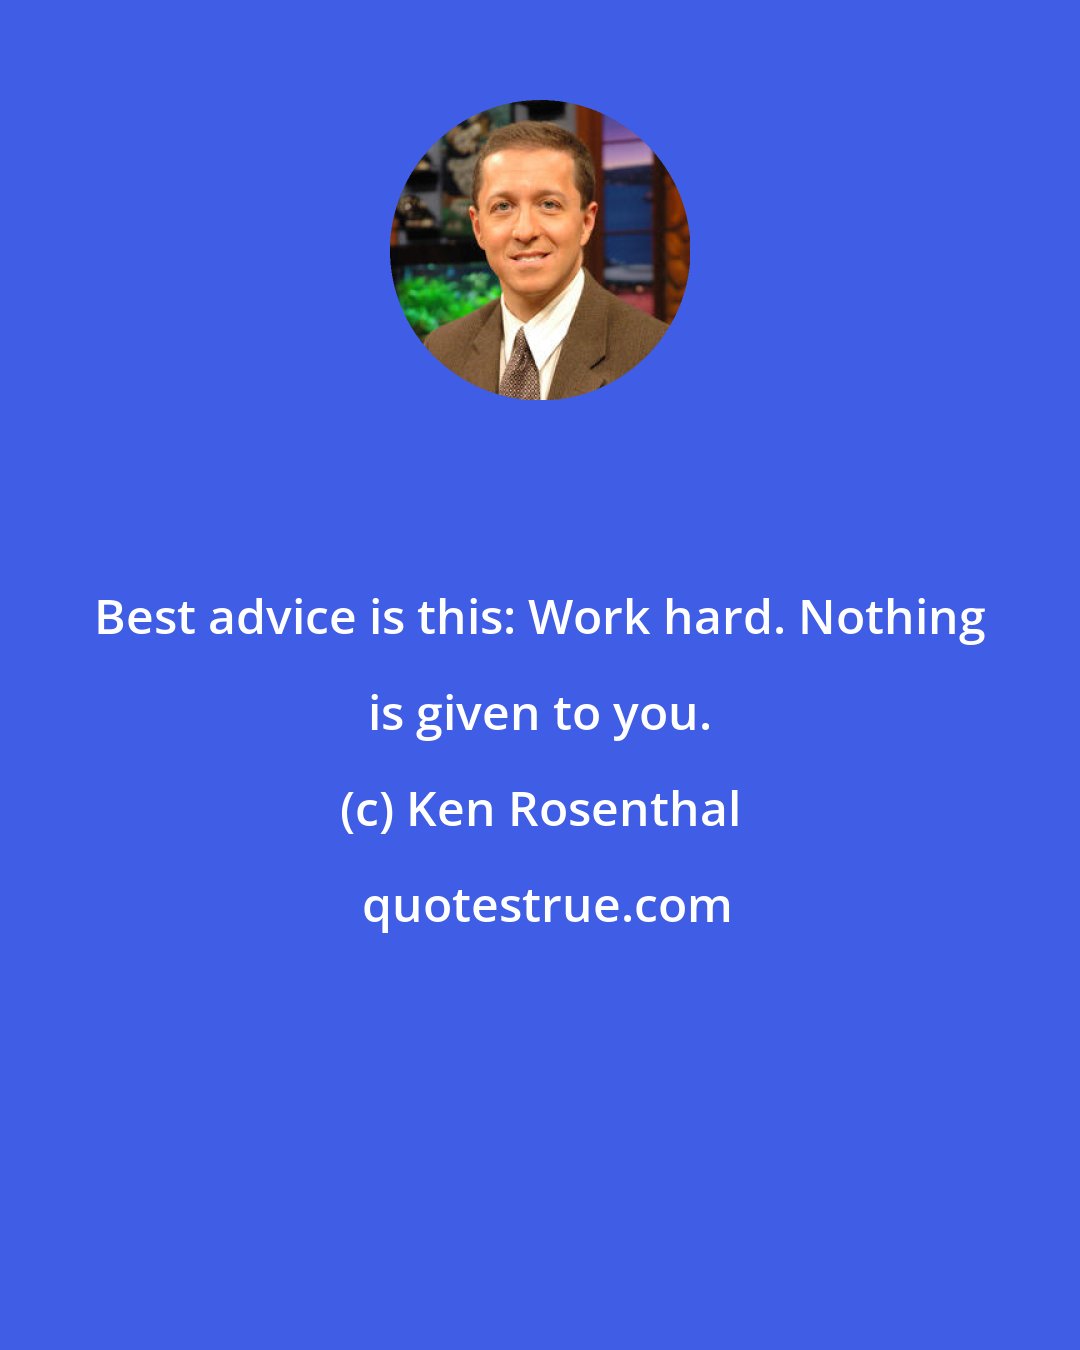 Ken Rosenthal: Best advice is this: Work hard. Nothing is given to you.